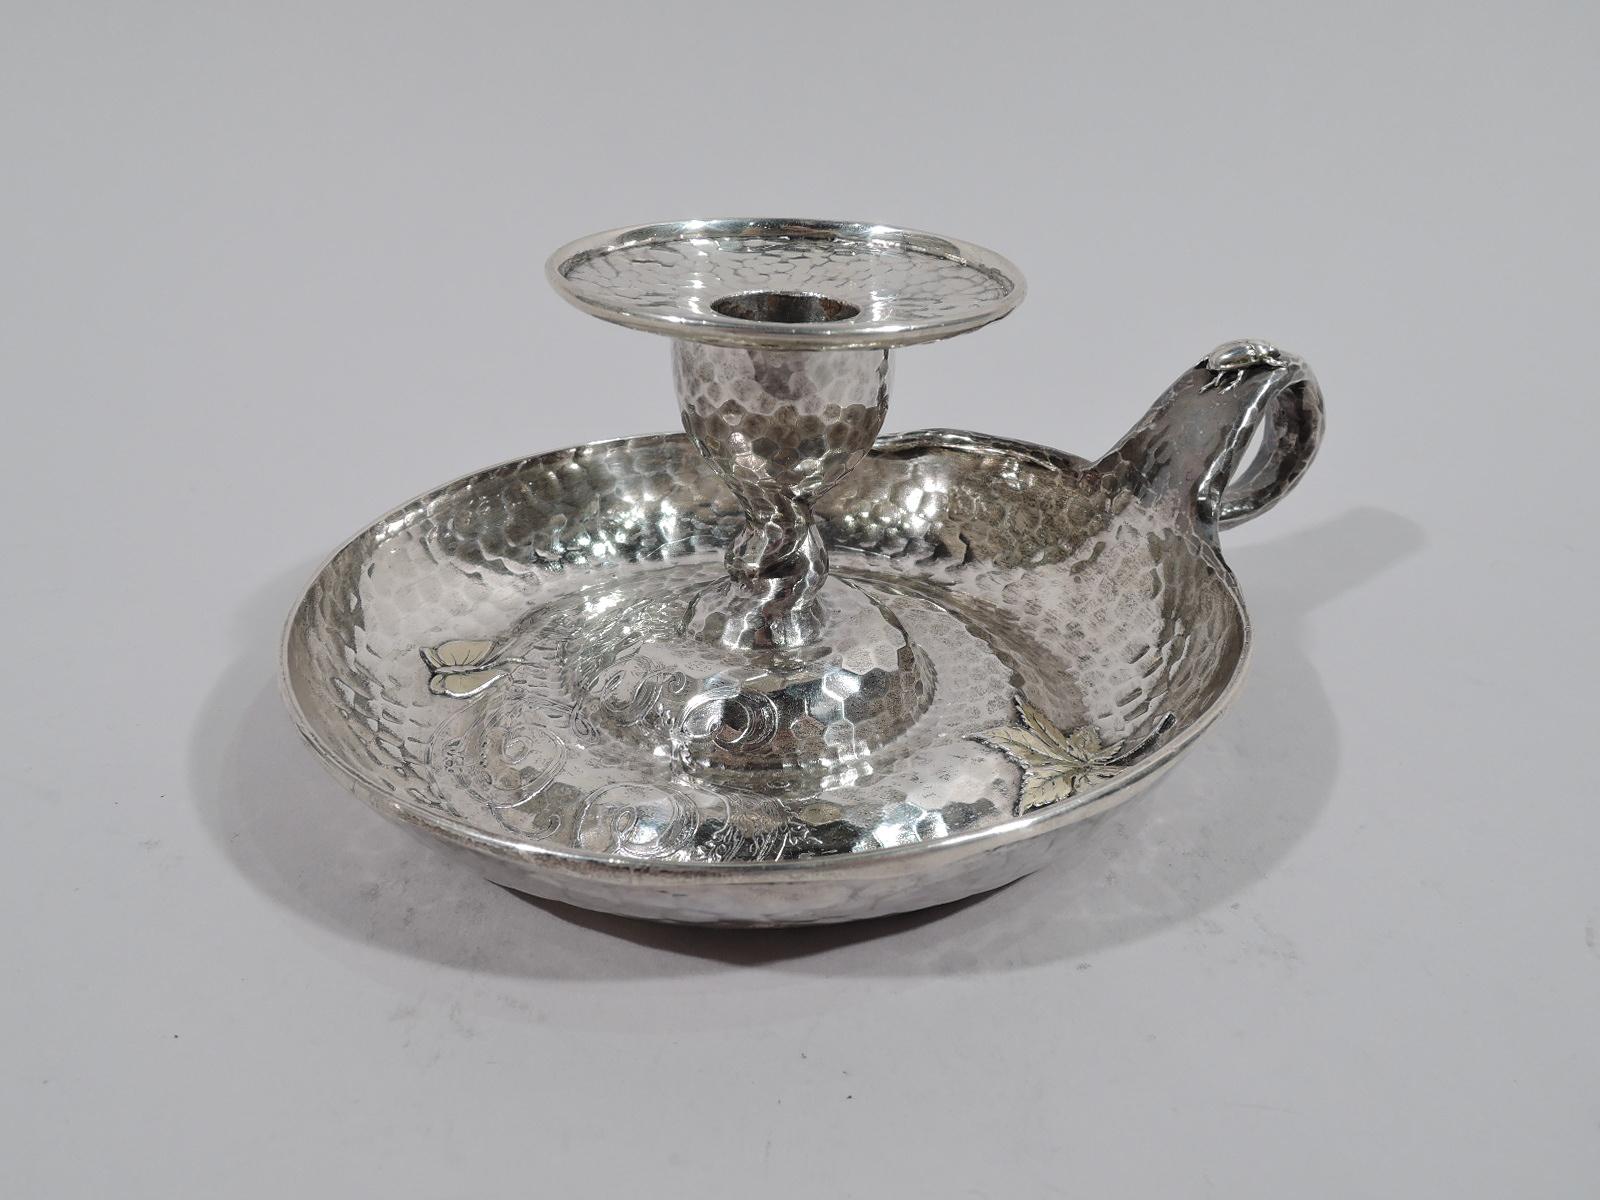 Japonesque Arts & Crafts applied sterling silver chamberstick. Made by Tiffany & Co. in New York, ca 1879. Deep bowl and twisted-loop handle with tendril tail. Urn socket with wide and flat detachable bobeche on central raised spiral. Beatles on